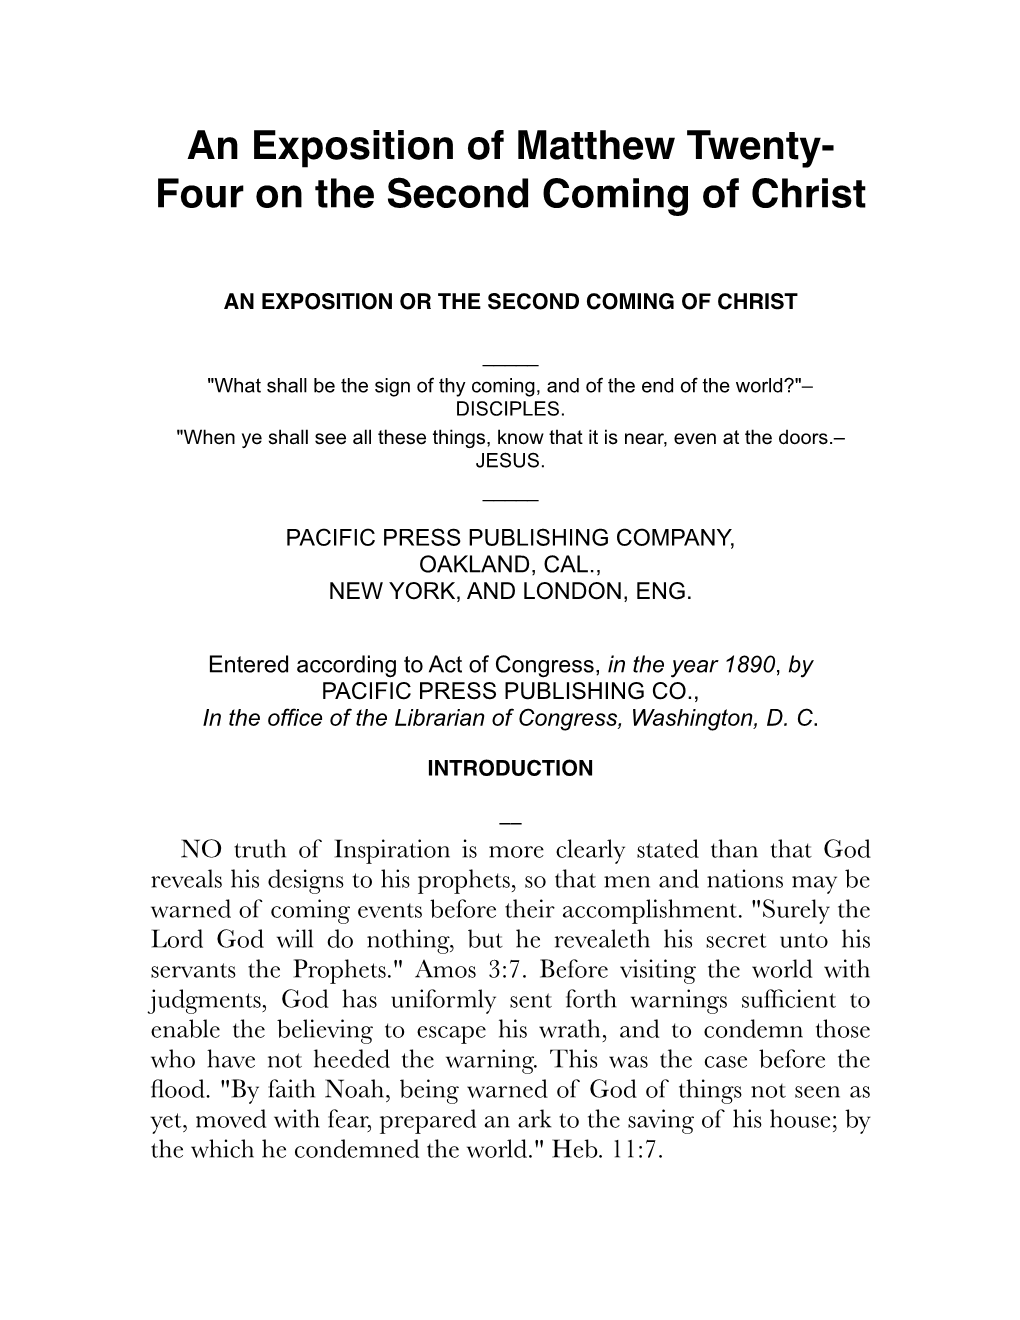 An Exposition of Matthew Twenty- Four on the Second Coming of Christ